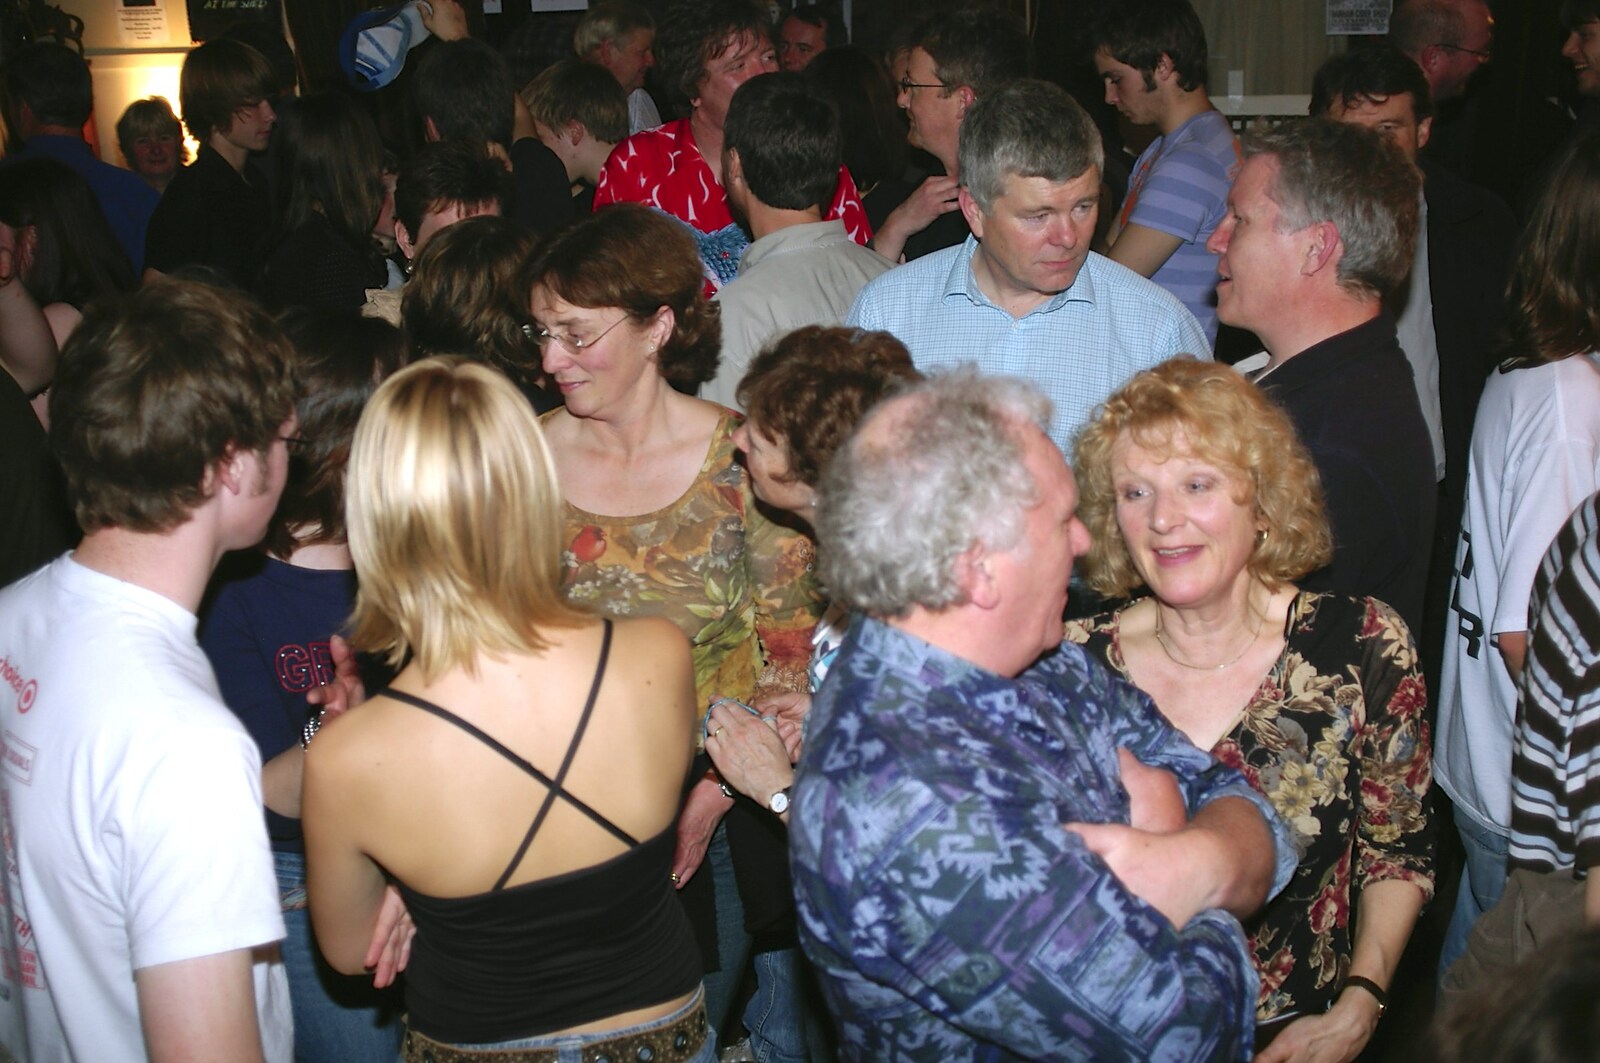 The BBs' Last-Ever Gig at The Cider Shed, Banham, Norfolk - 19th November 2004: The crowd mills about